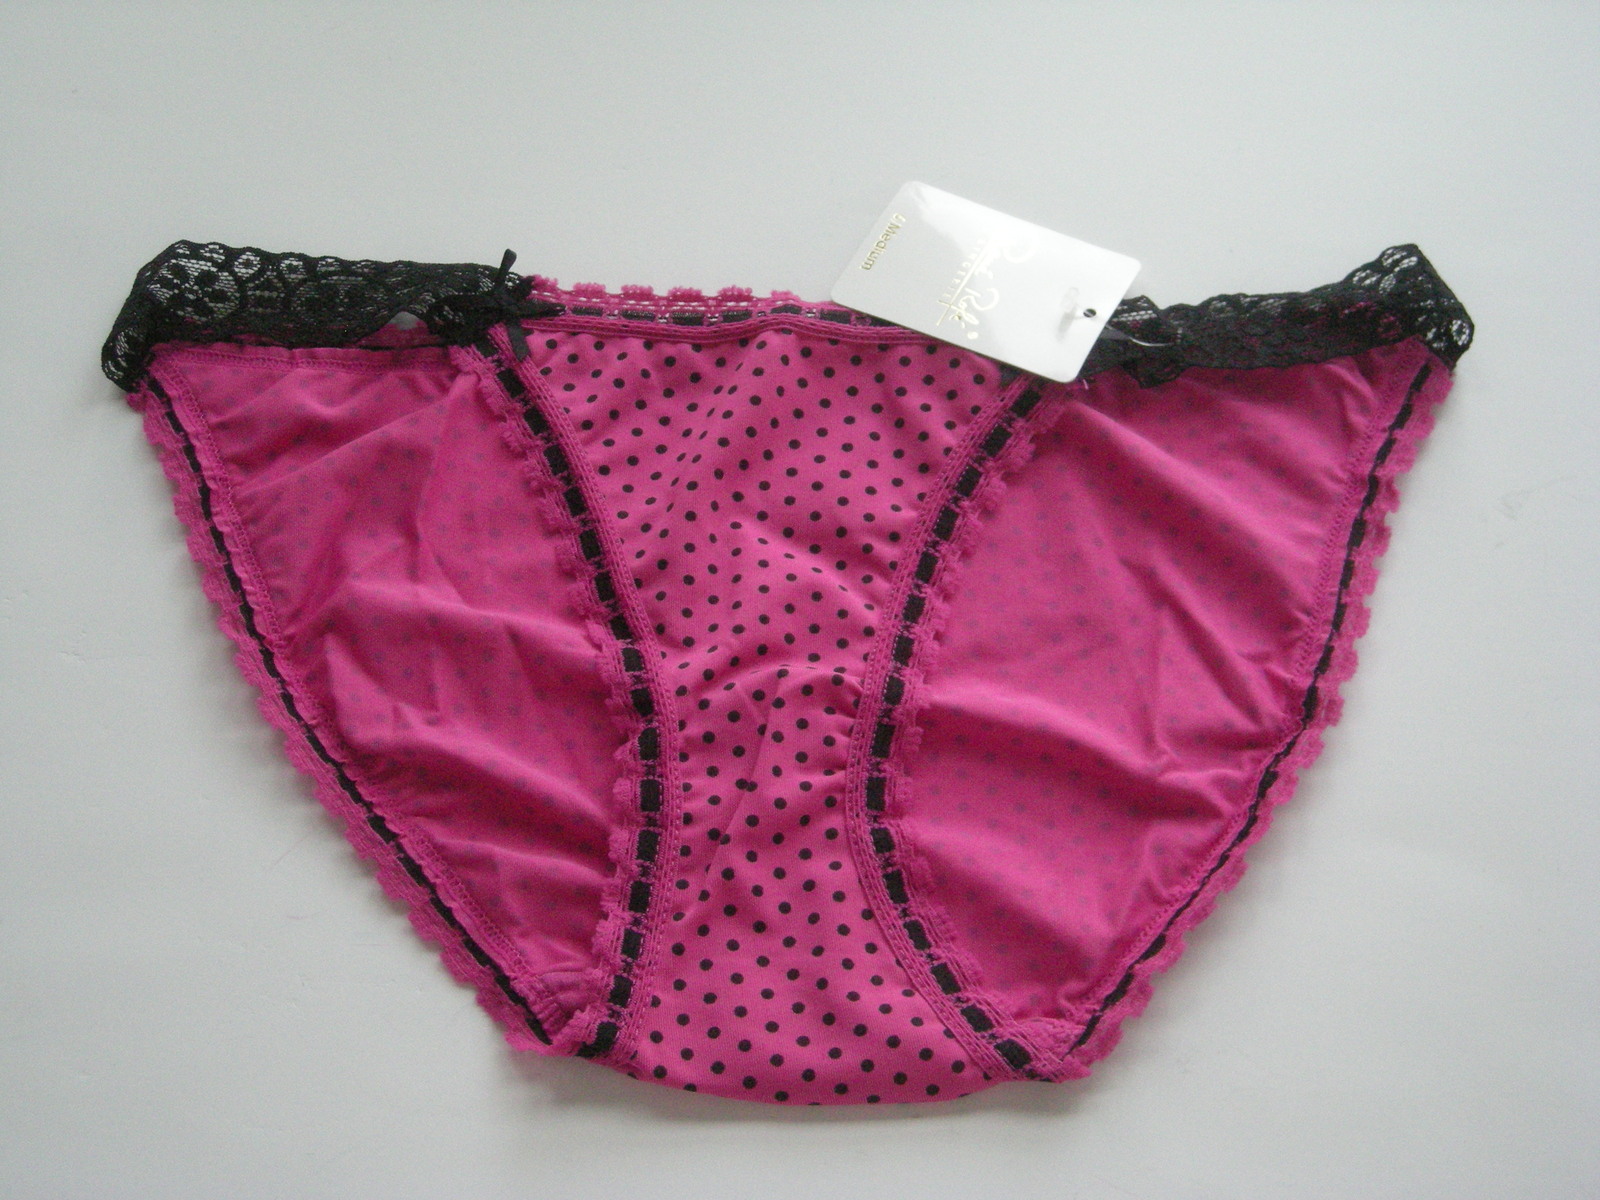 Rene Rofe Silky Hot Pink Bikini with Black Lace Strings and Black Dots Size 6 - $6.99